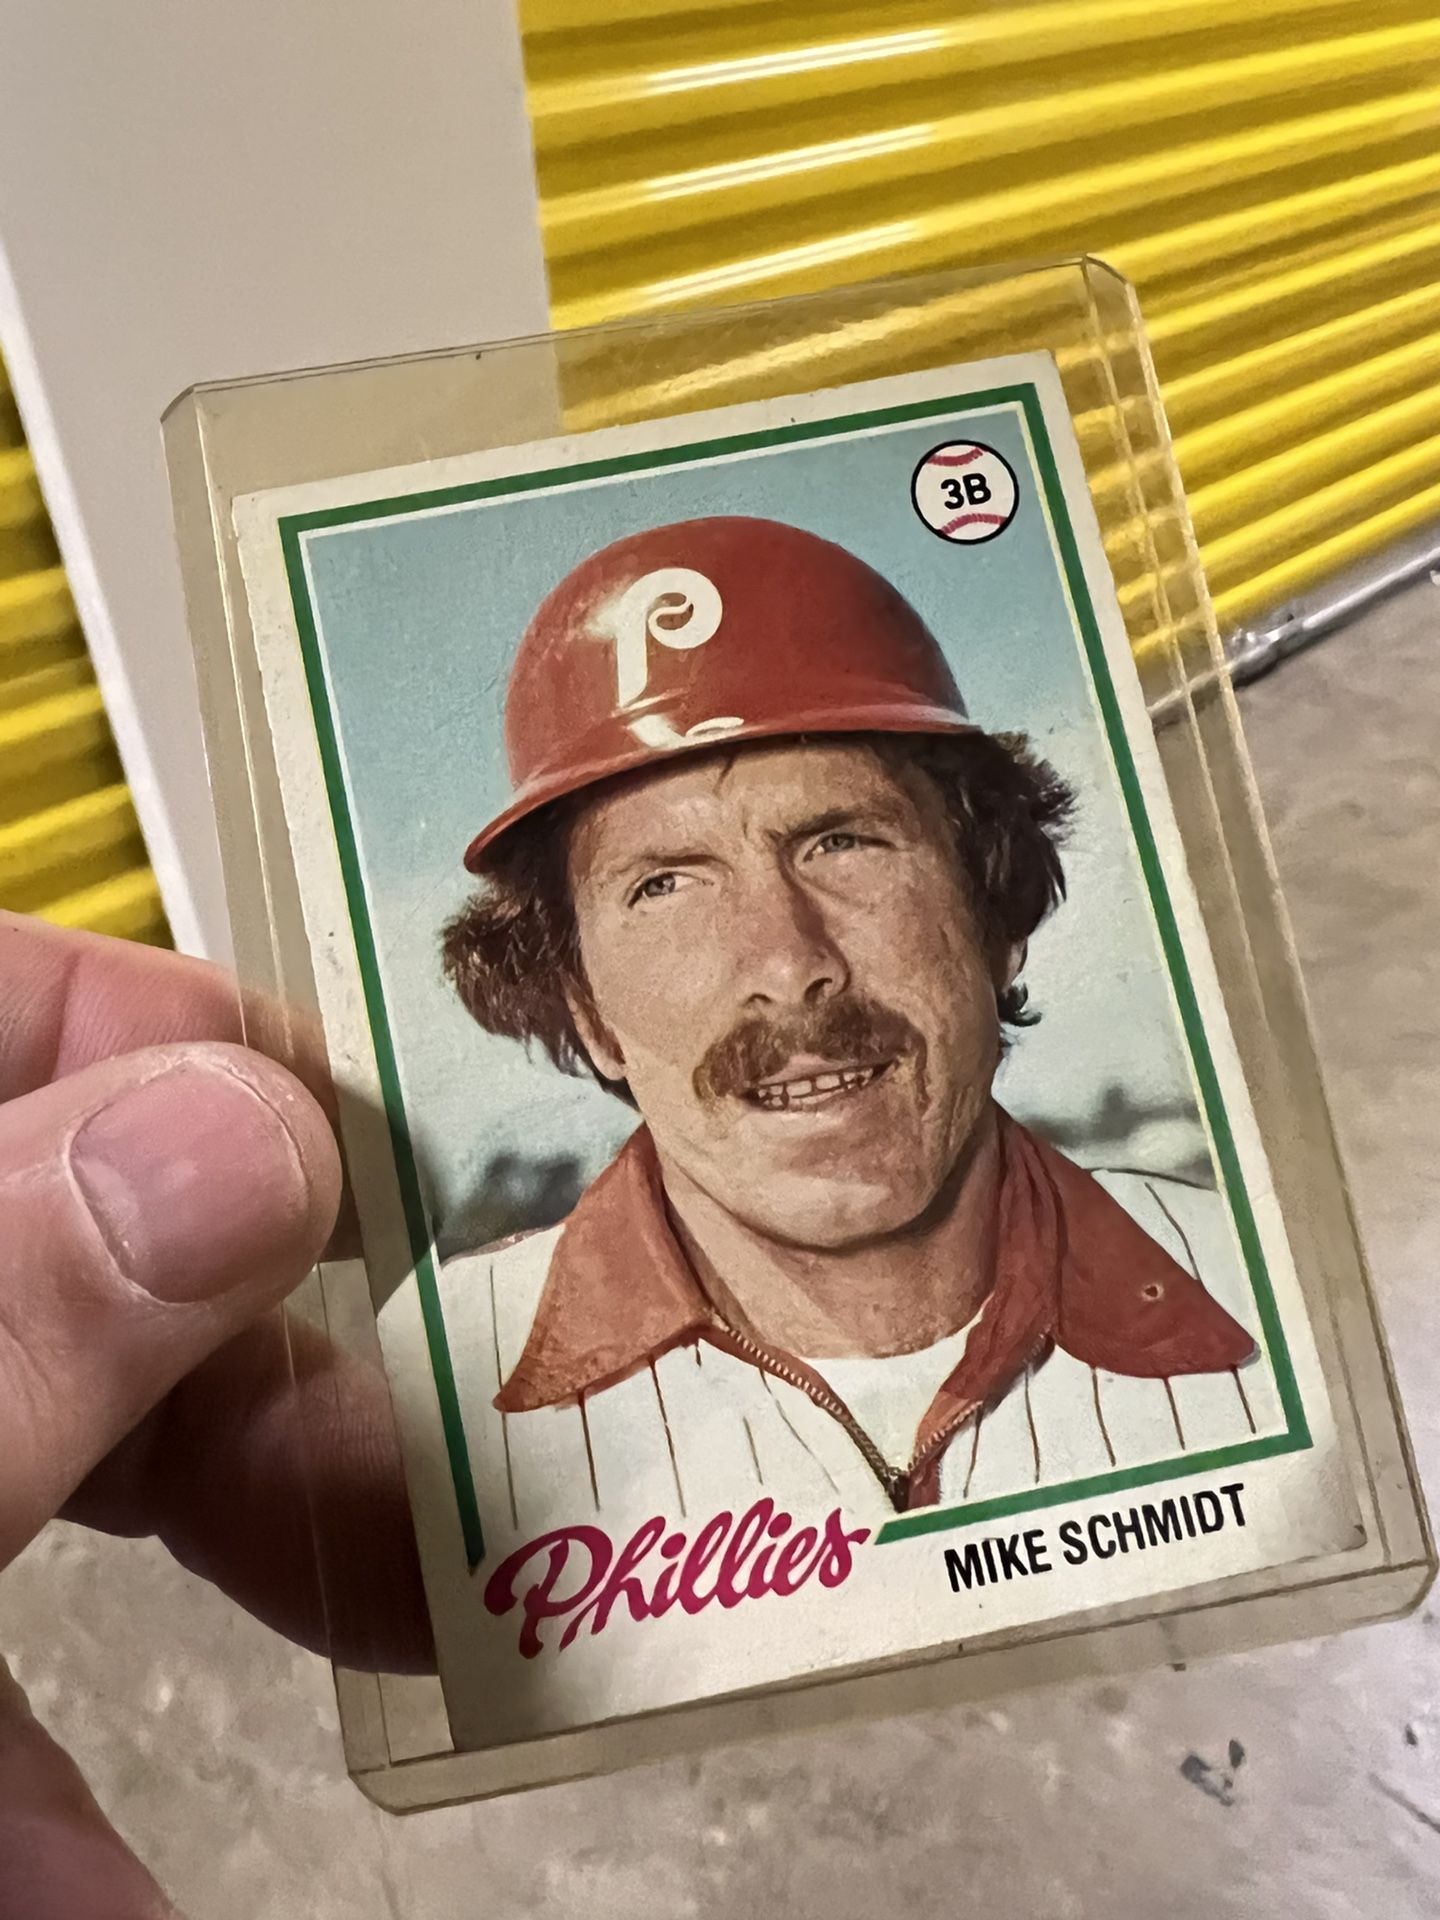 Mike Schmidt 1978 Topps #360 Phillies Card for Sale in Washougal, WA -  OfferUp